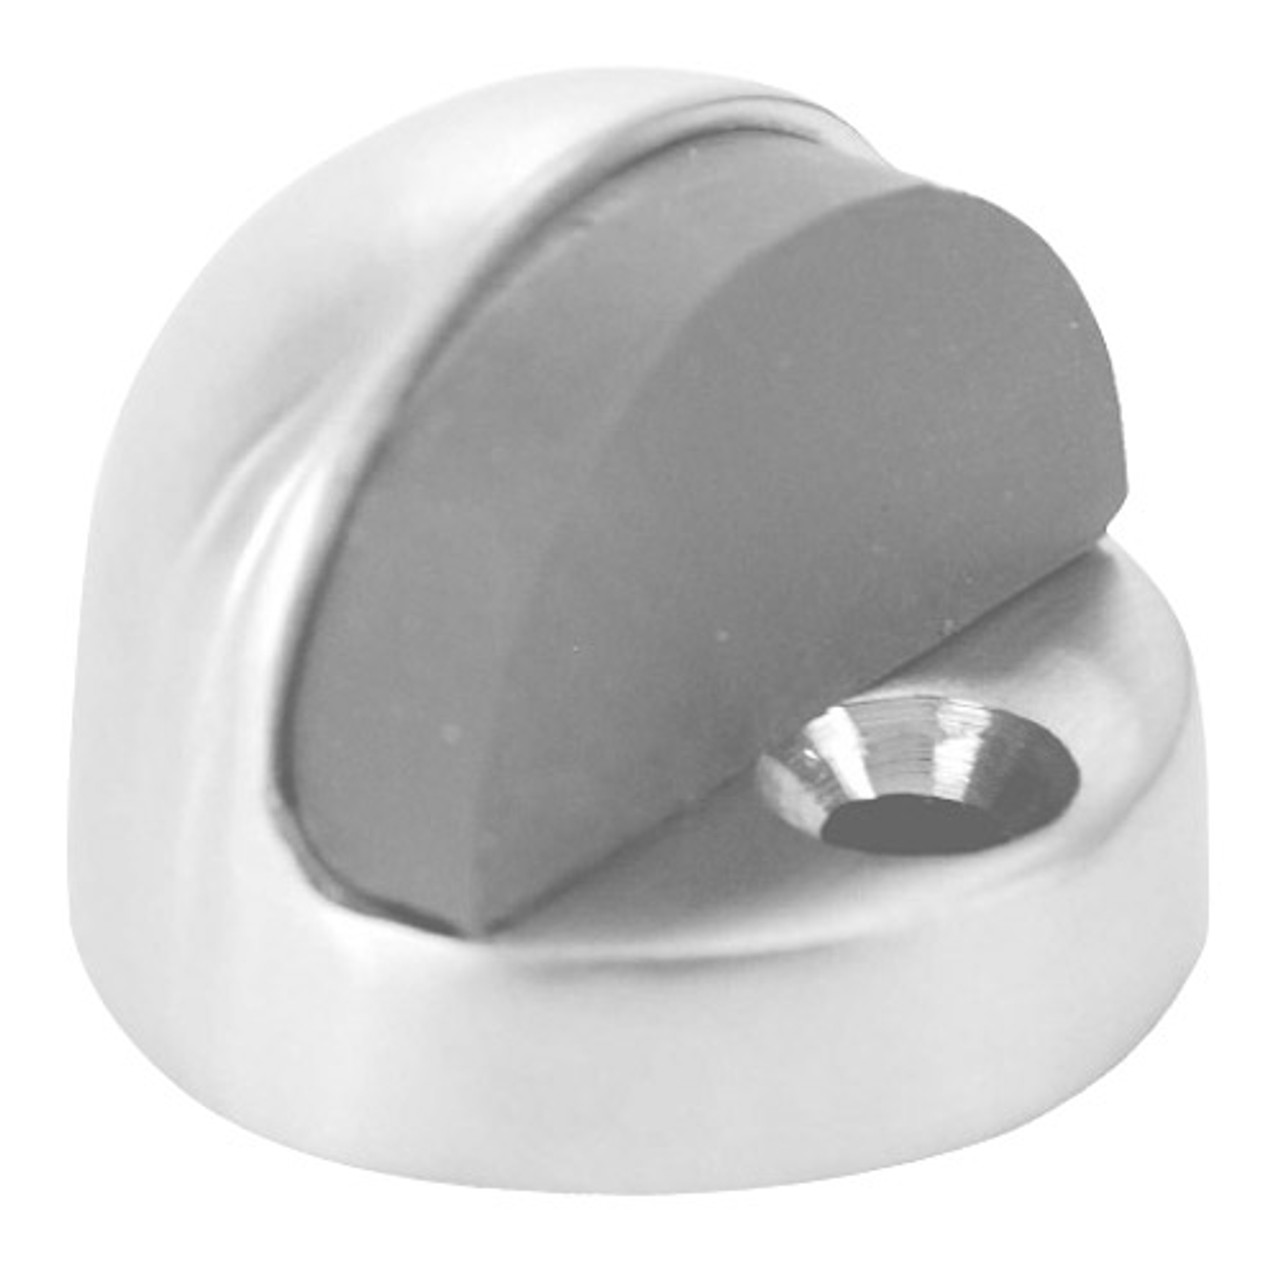 1442-625 Don Jo Floor Stop in Polished Chrome Finish